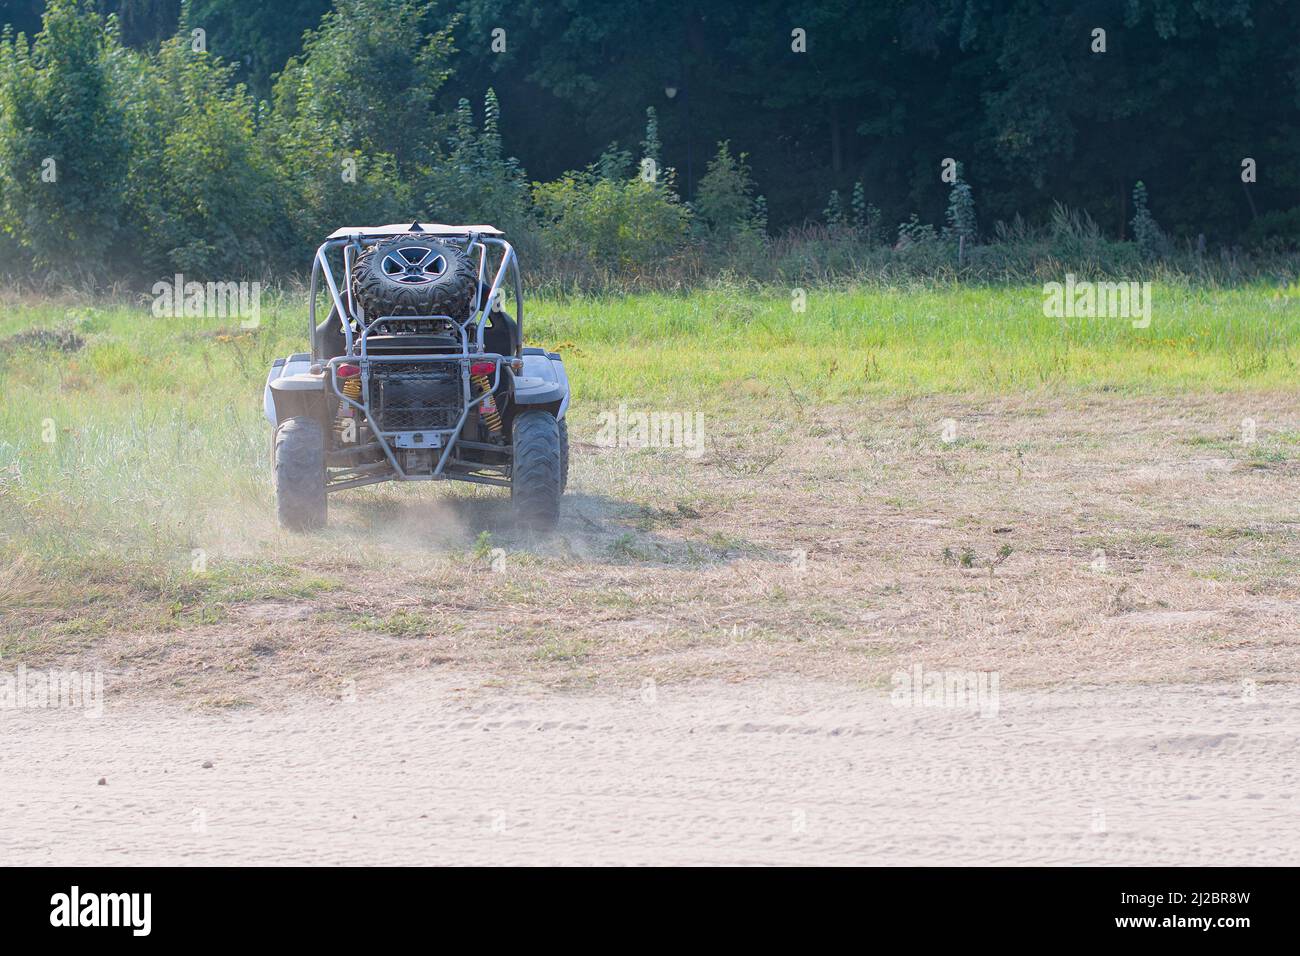 Buggy car in dirt. A close up Stock Photo